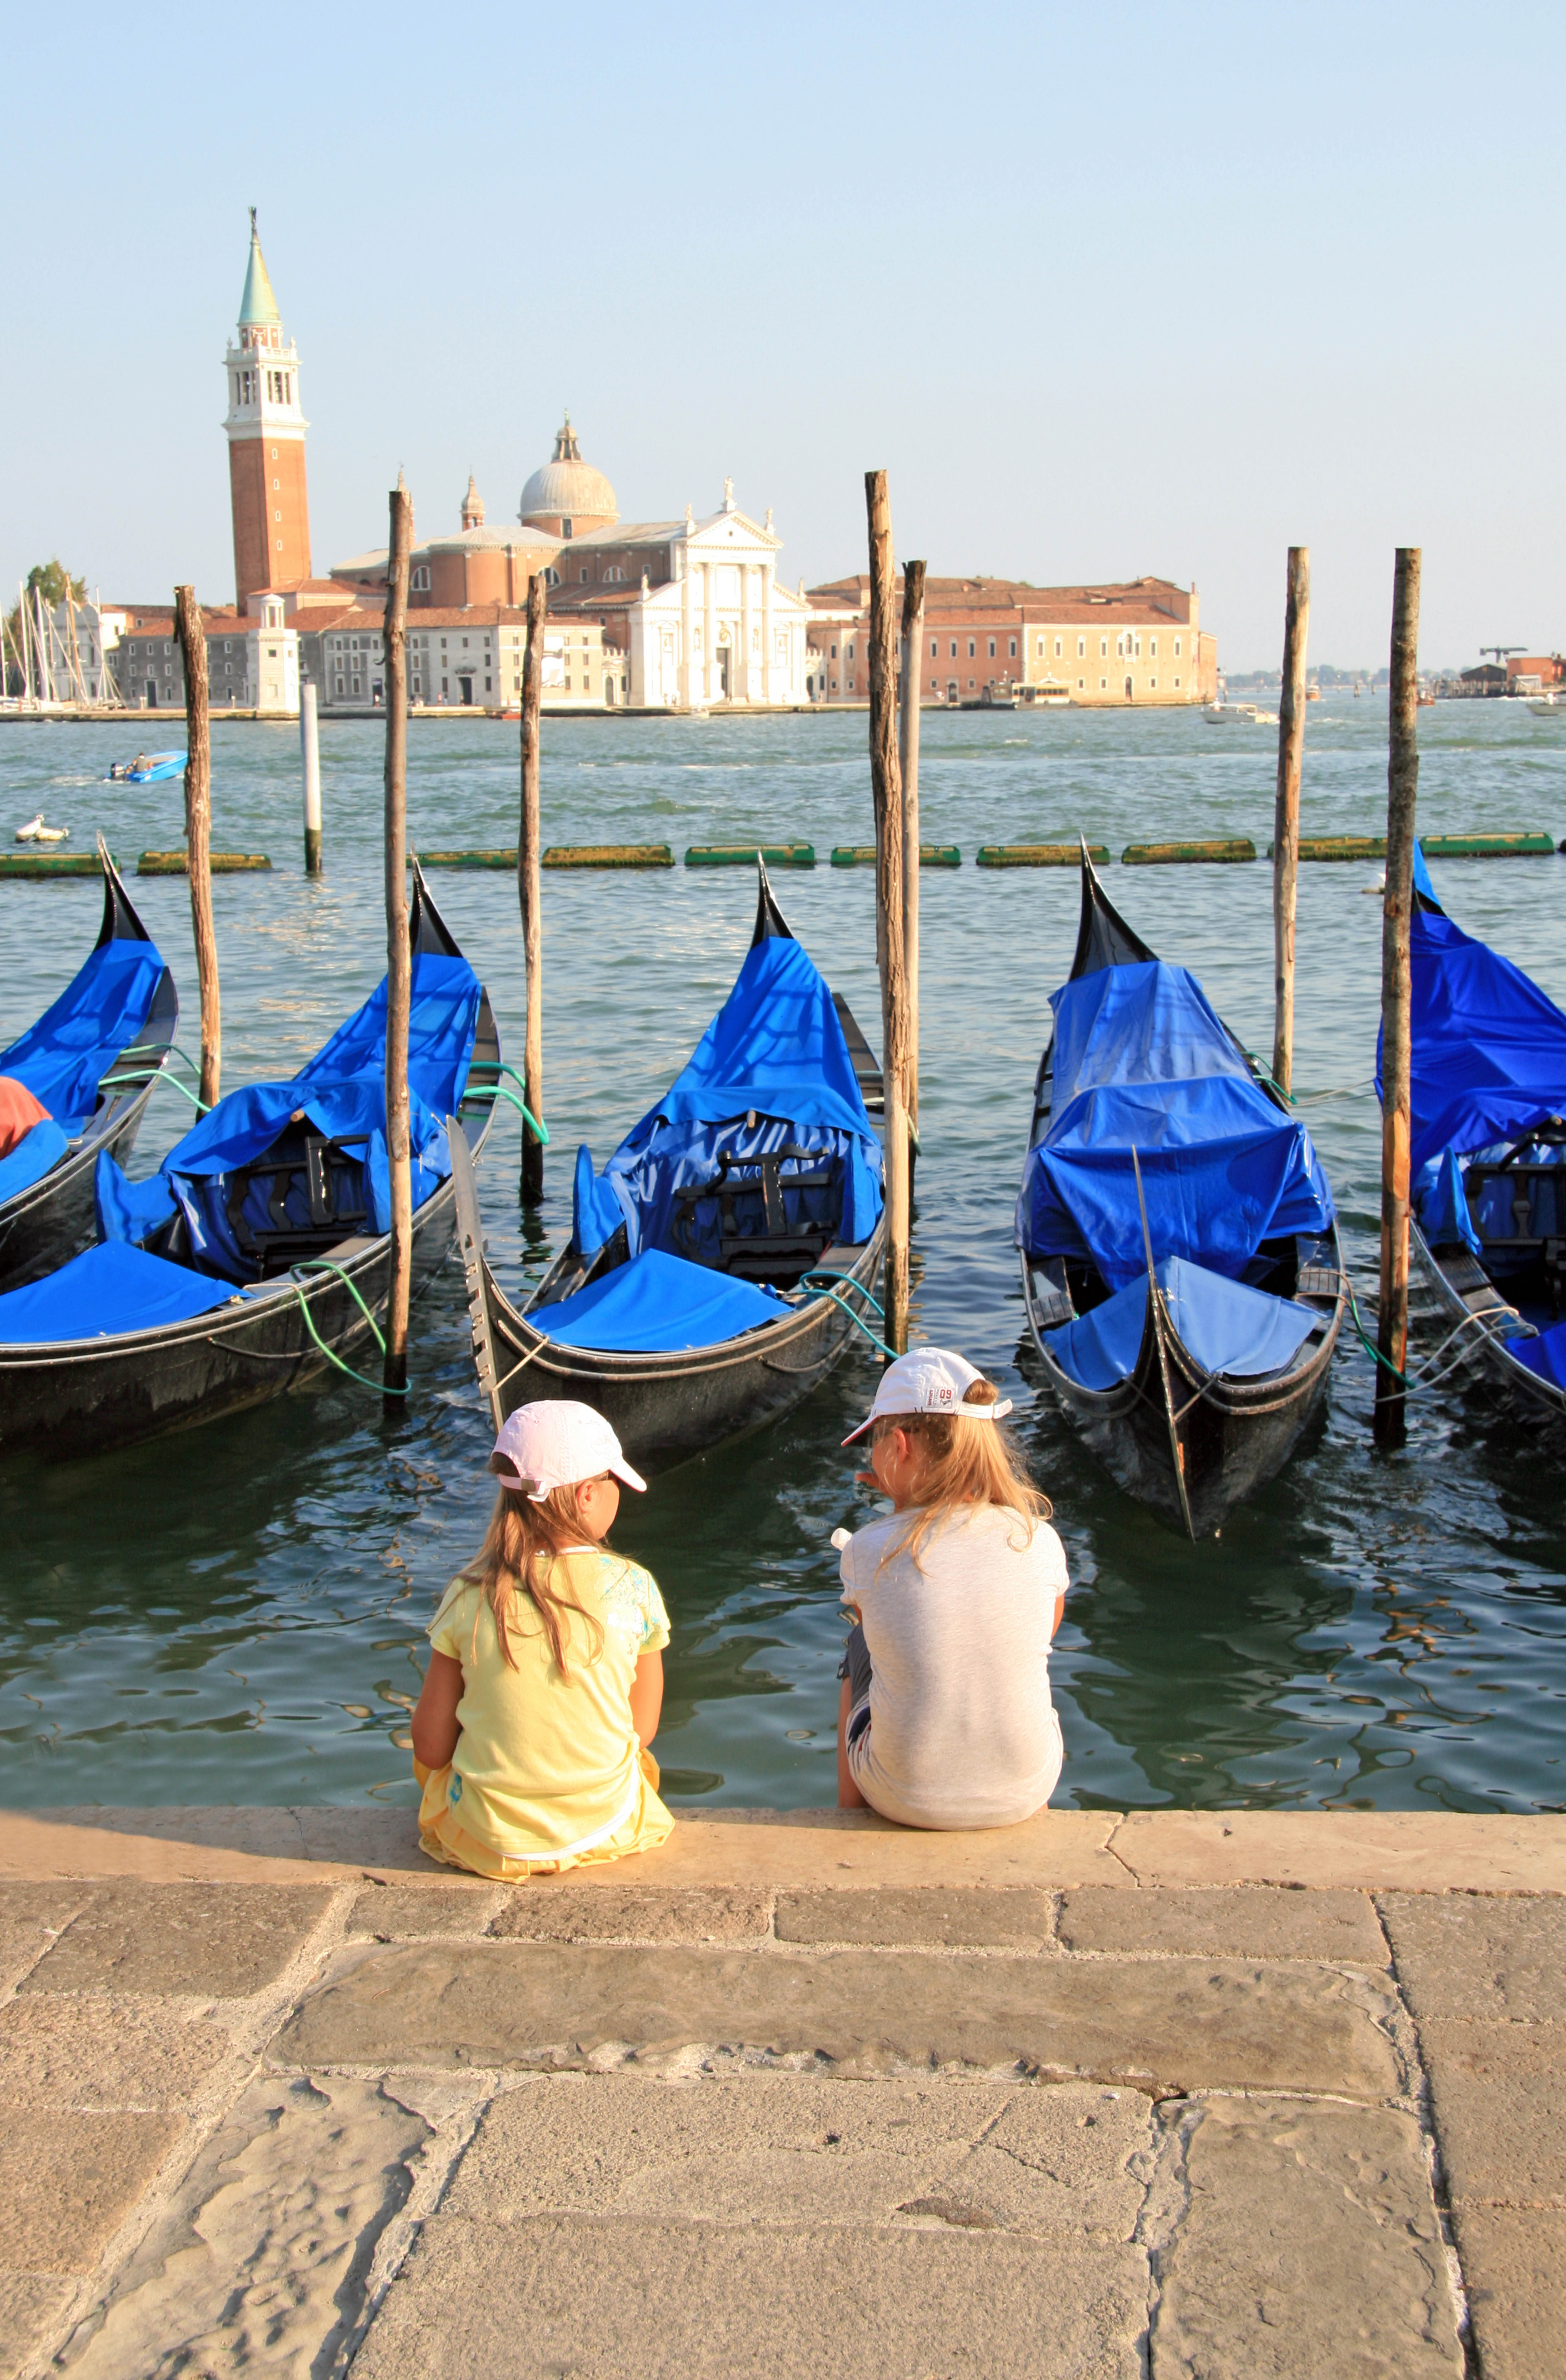 Gondolas are still the preferred way to navigate the canals of Venice, and they provide unforgettable moments for children and adults alike.